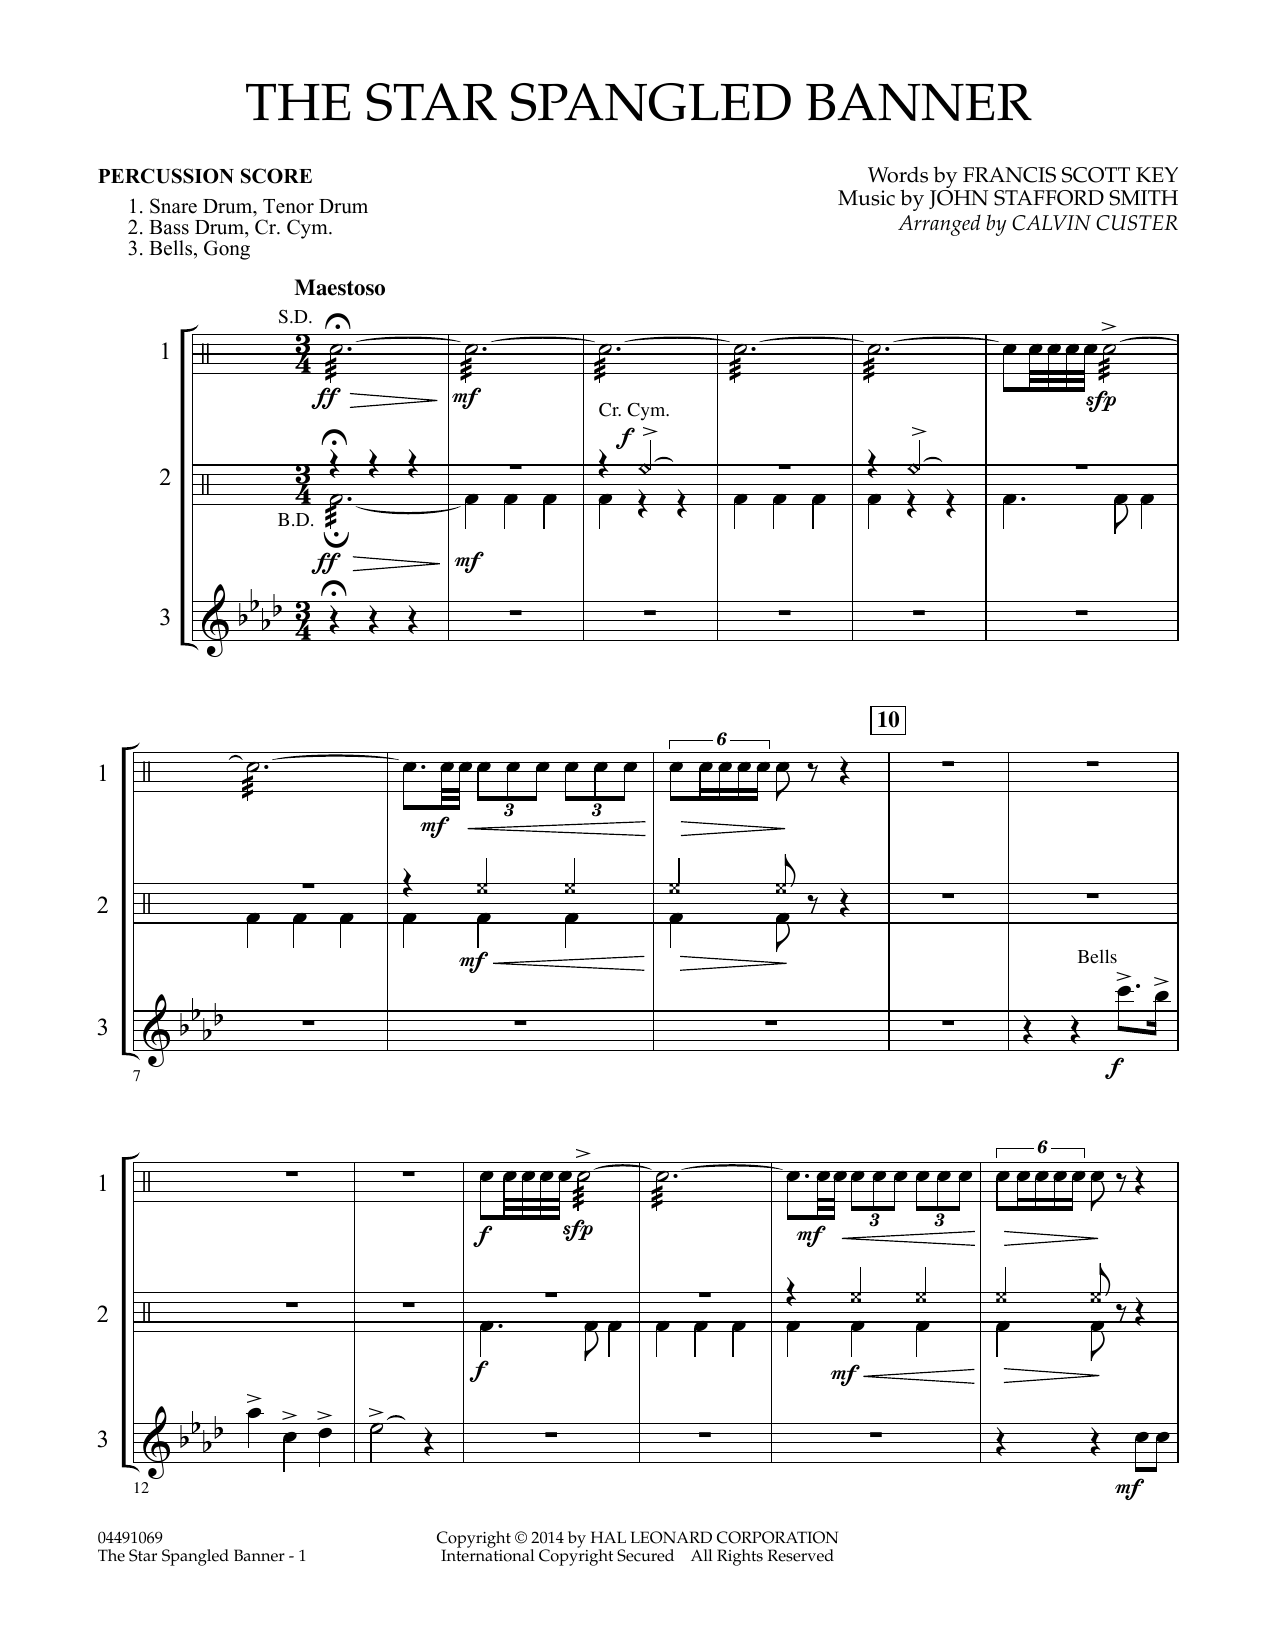 Calvin Custer The Star Spangled Banner - Percussion Score sheet music notes and chords. Download Printable PDF.